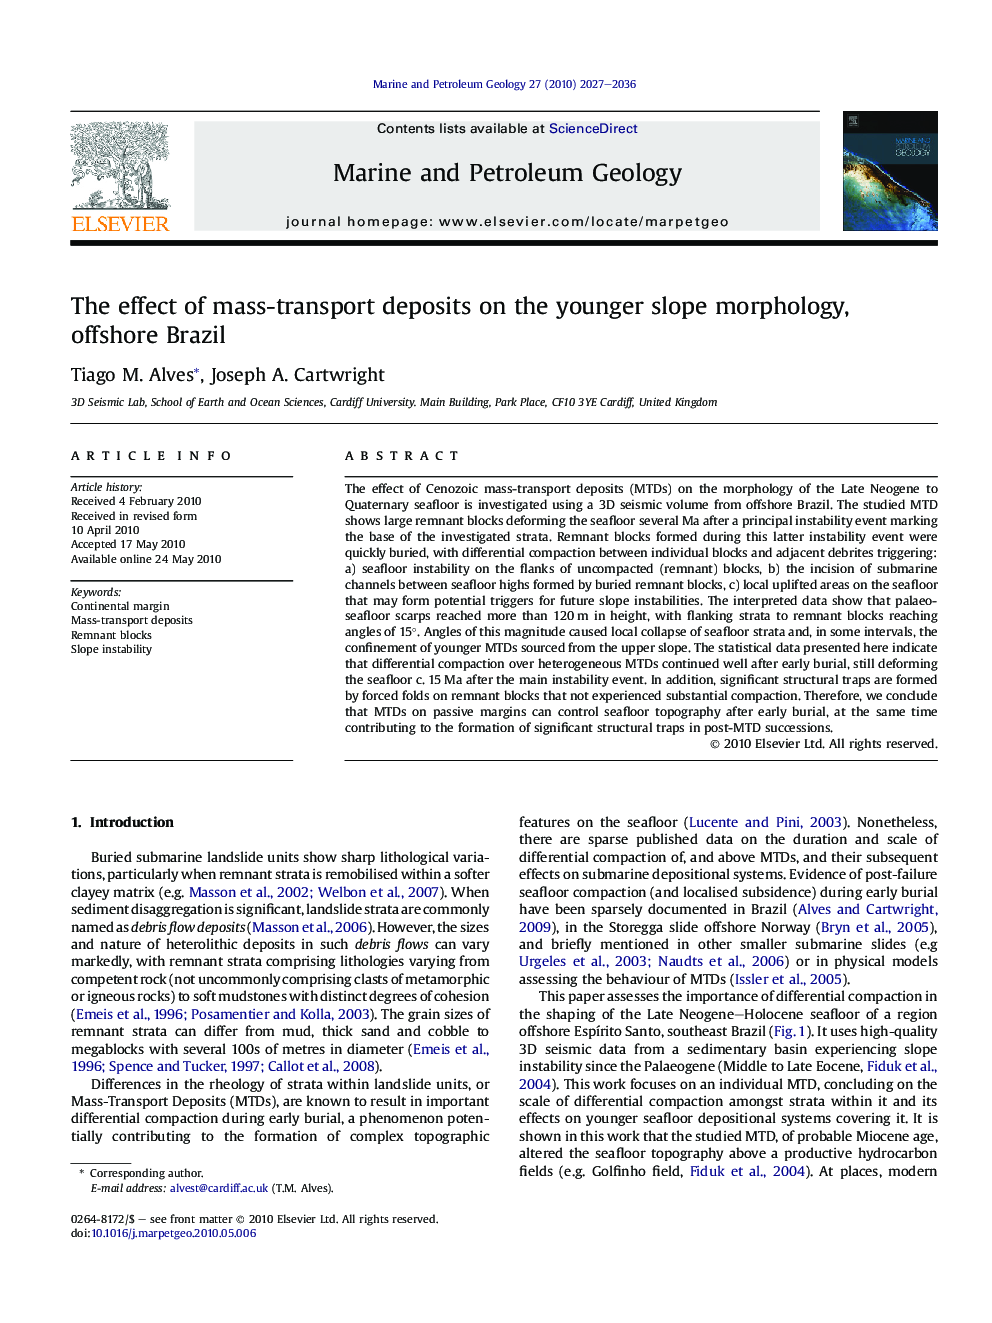 The effect of mass-transport deposits on the younger slope morphology, offshore Brazil